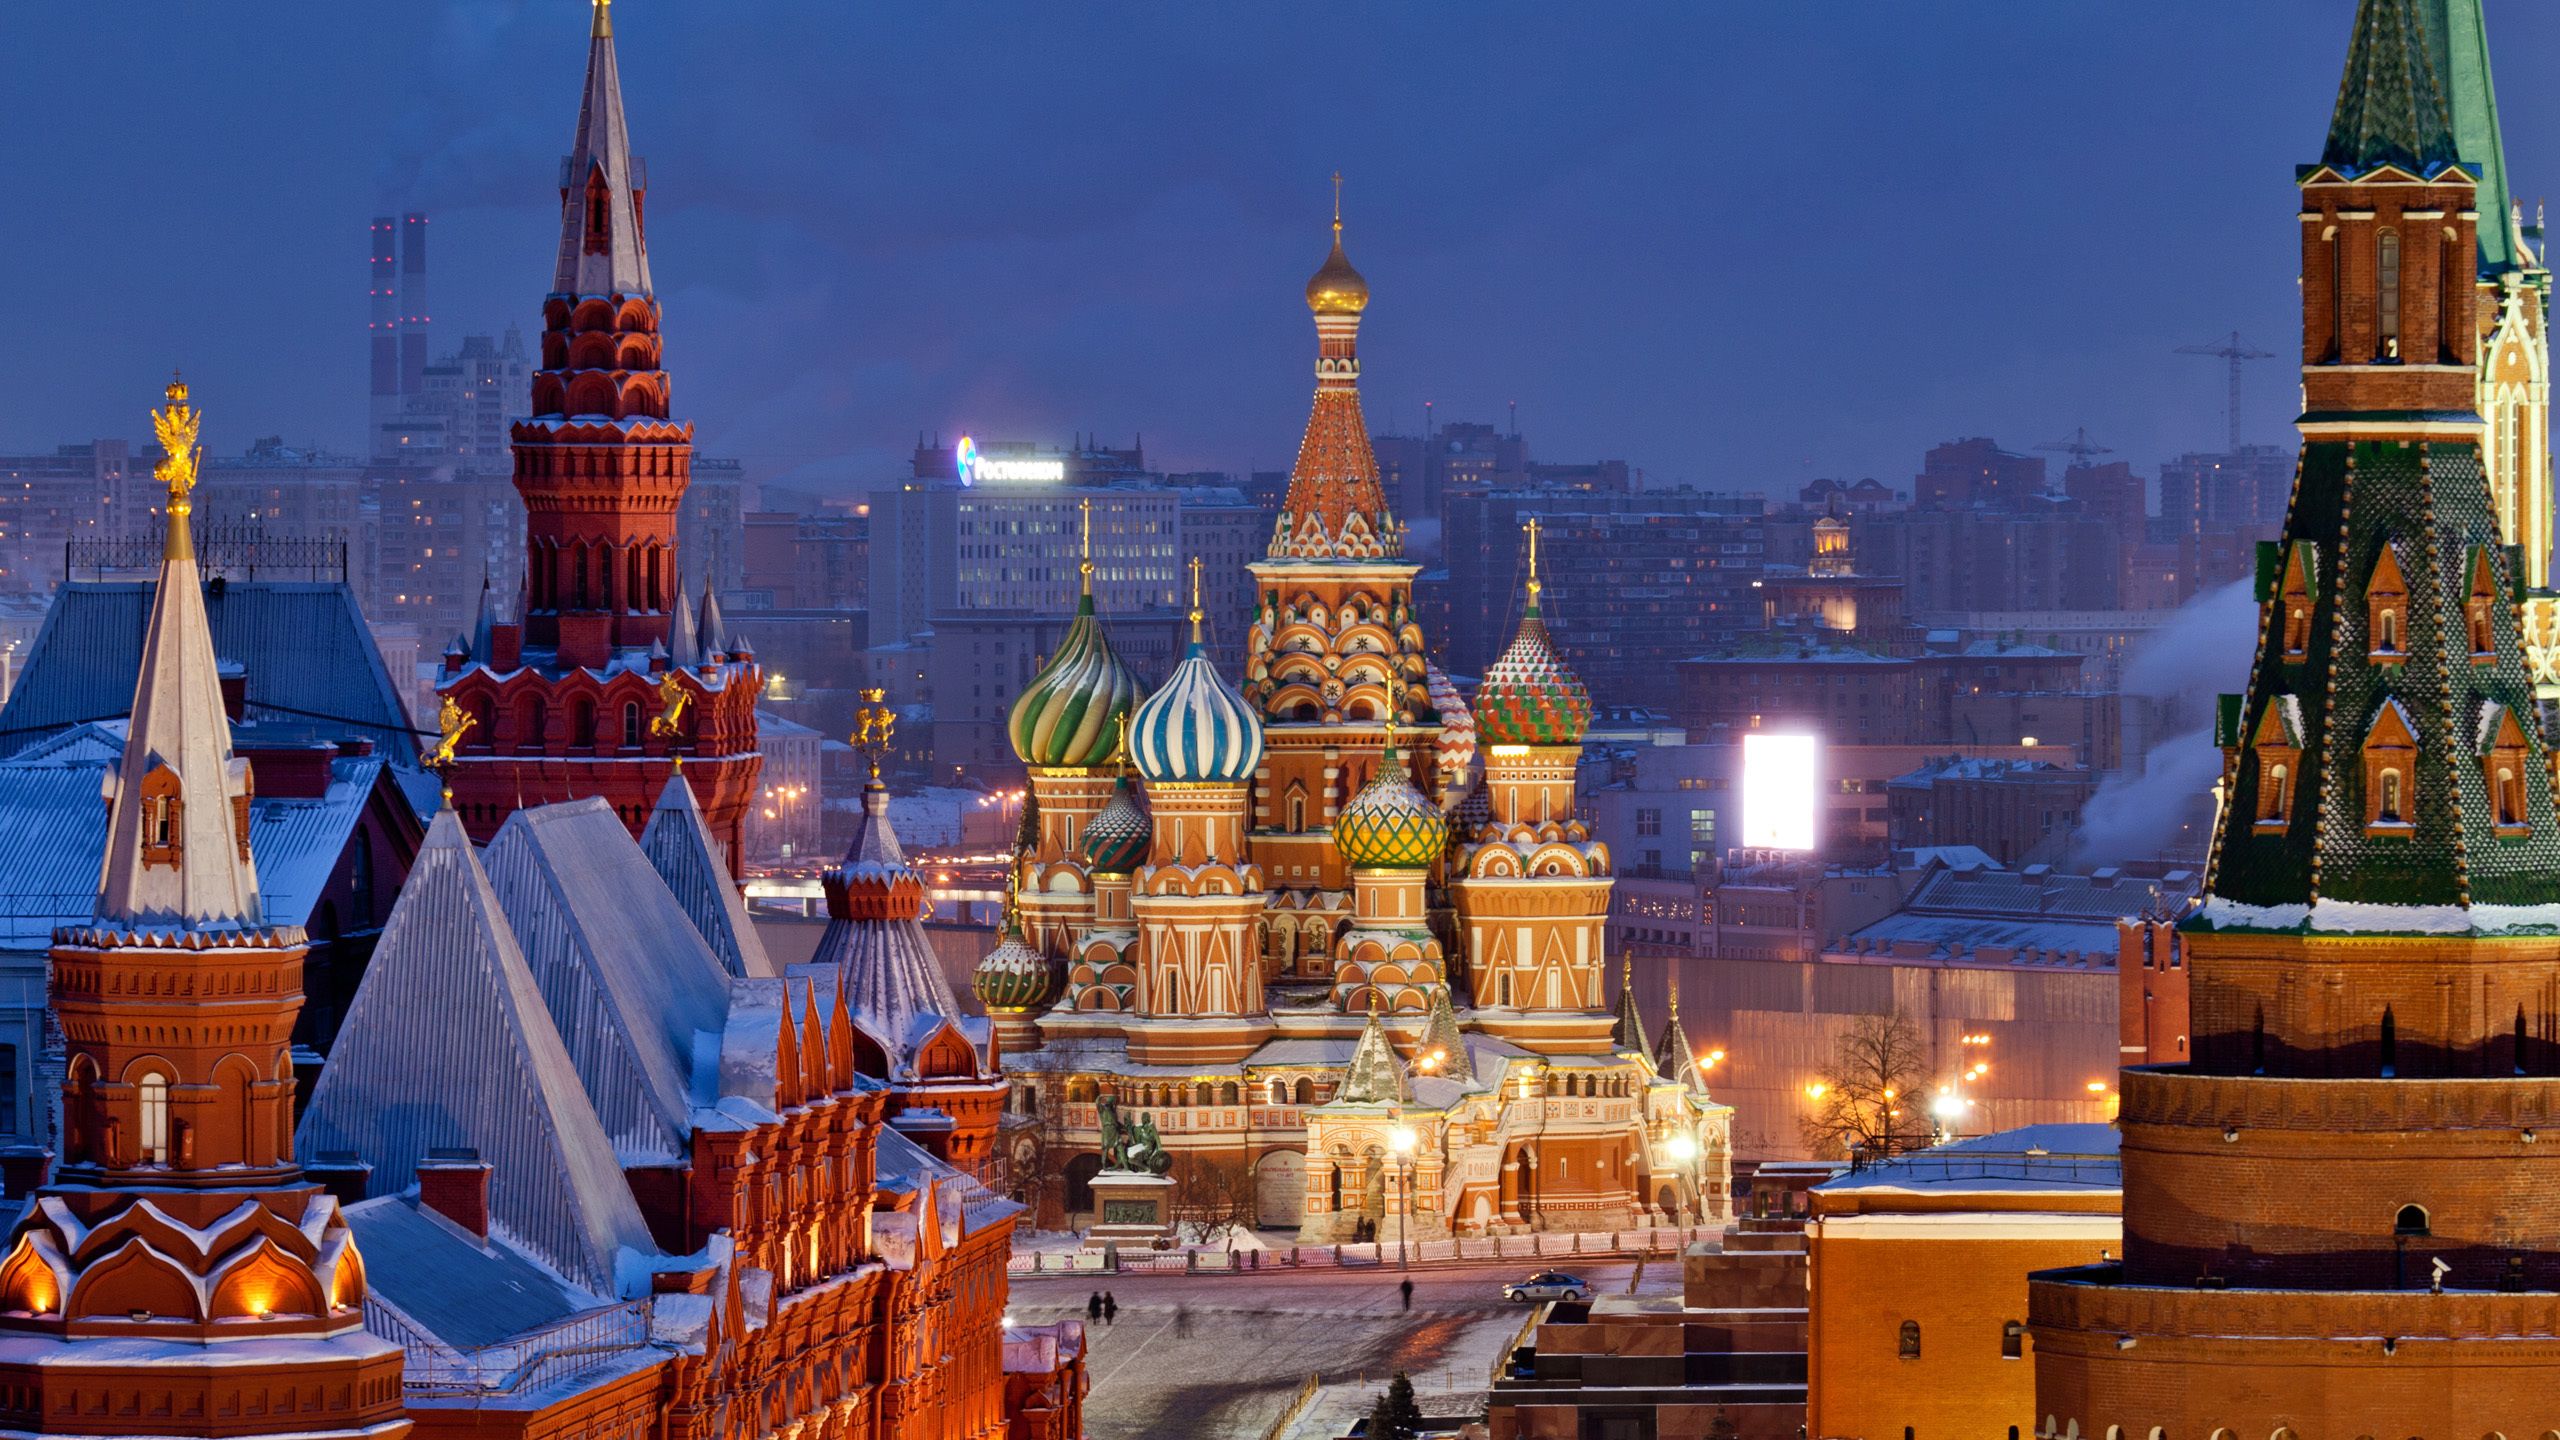 Moscow | Holidays | Pinterest | Winter time, Moscow and Wallpaper